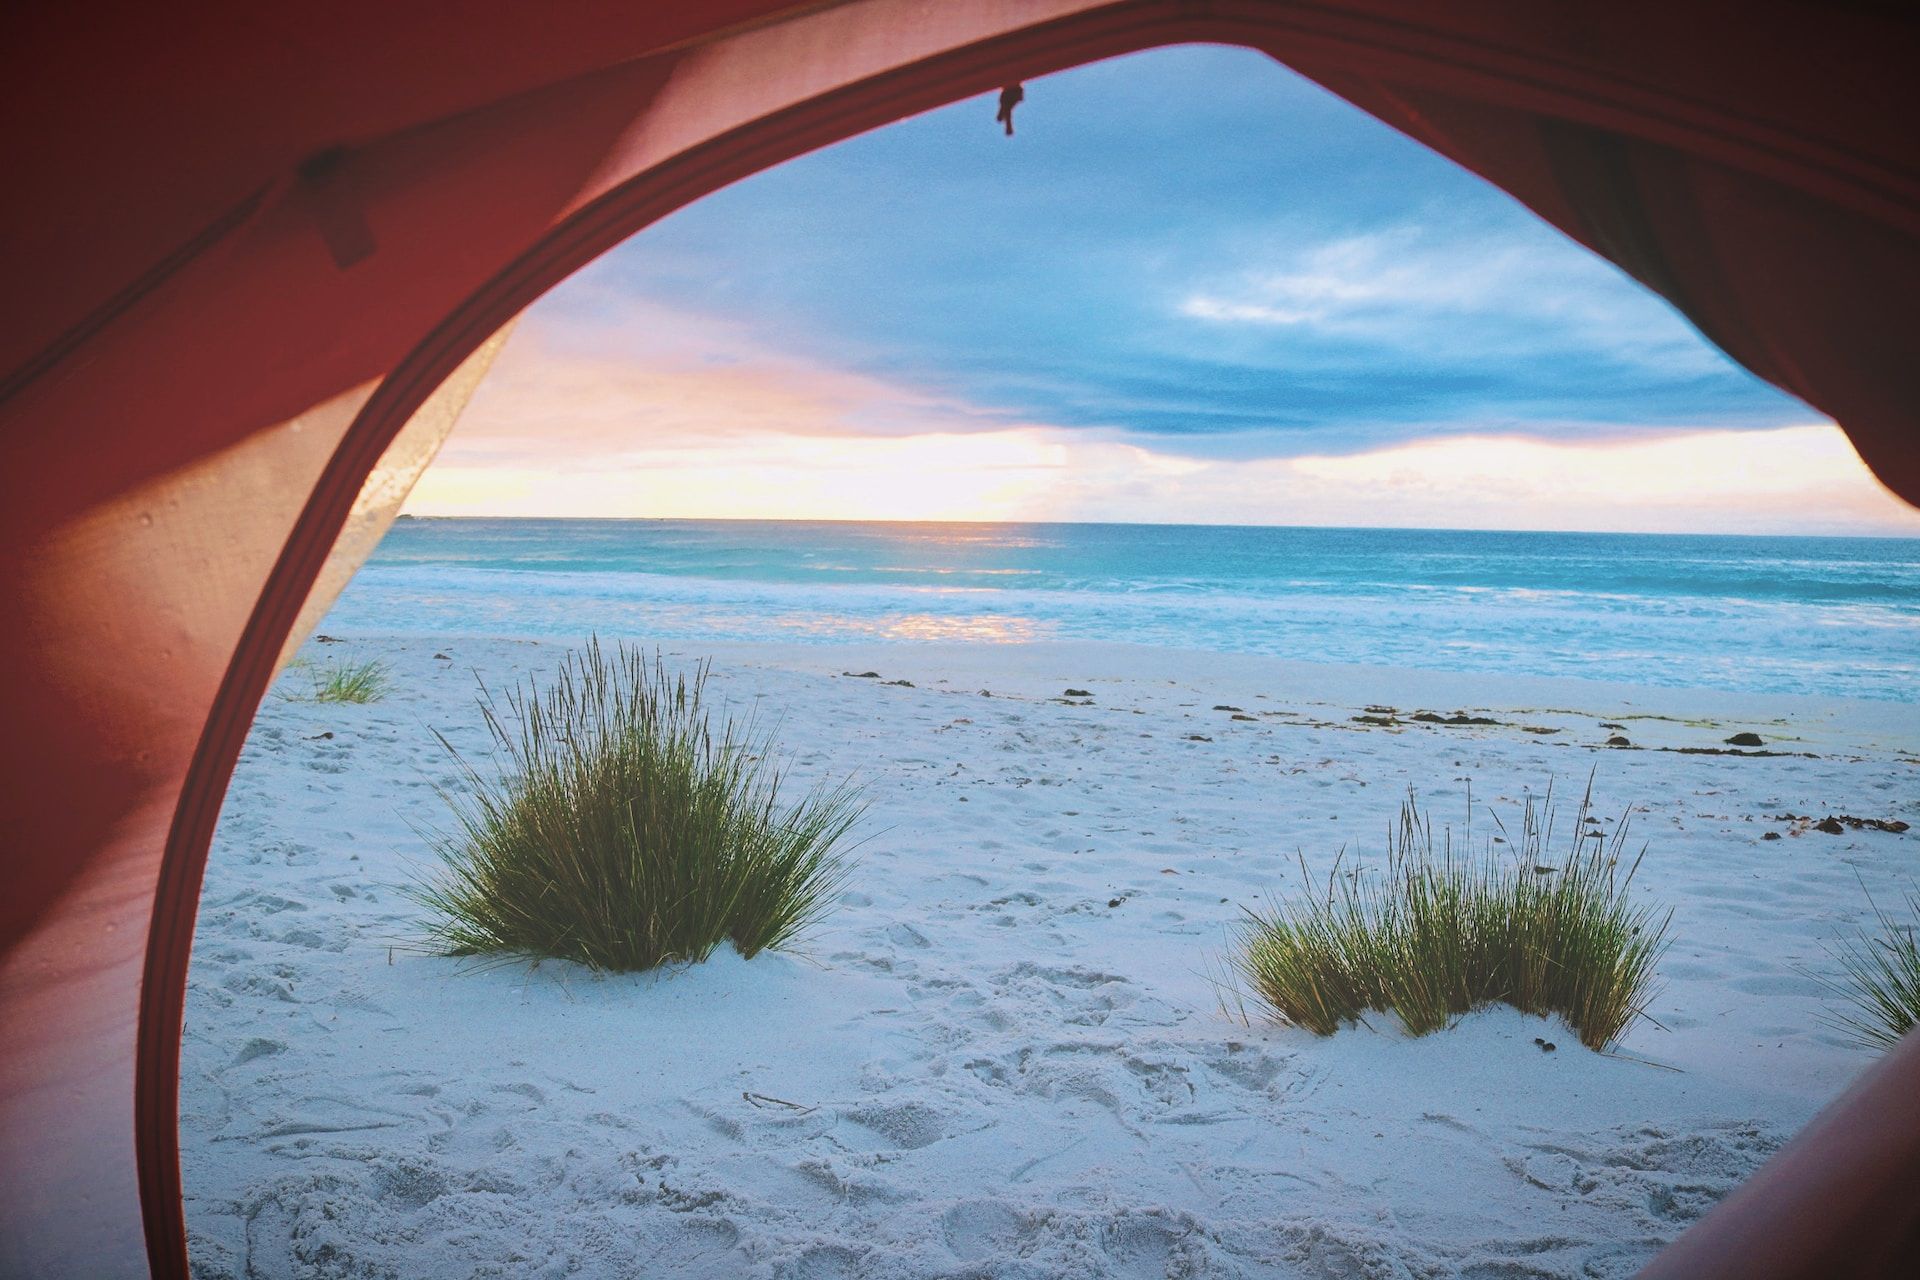 View from a tent set up on the beach